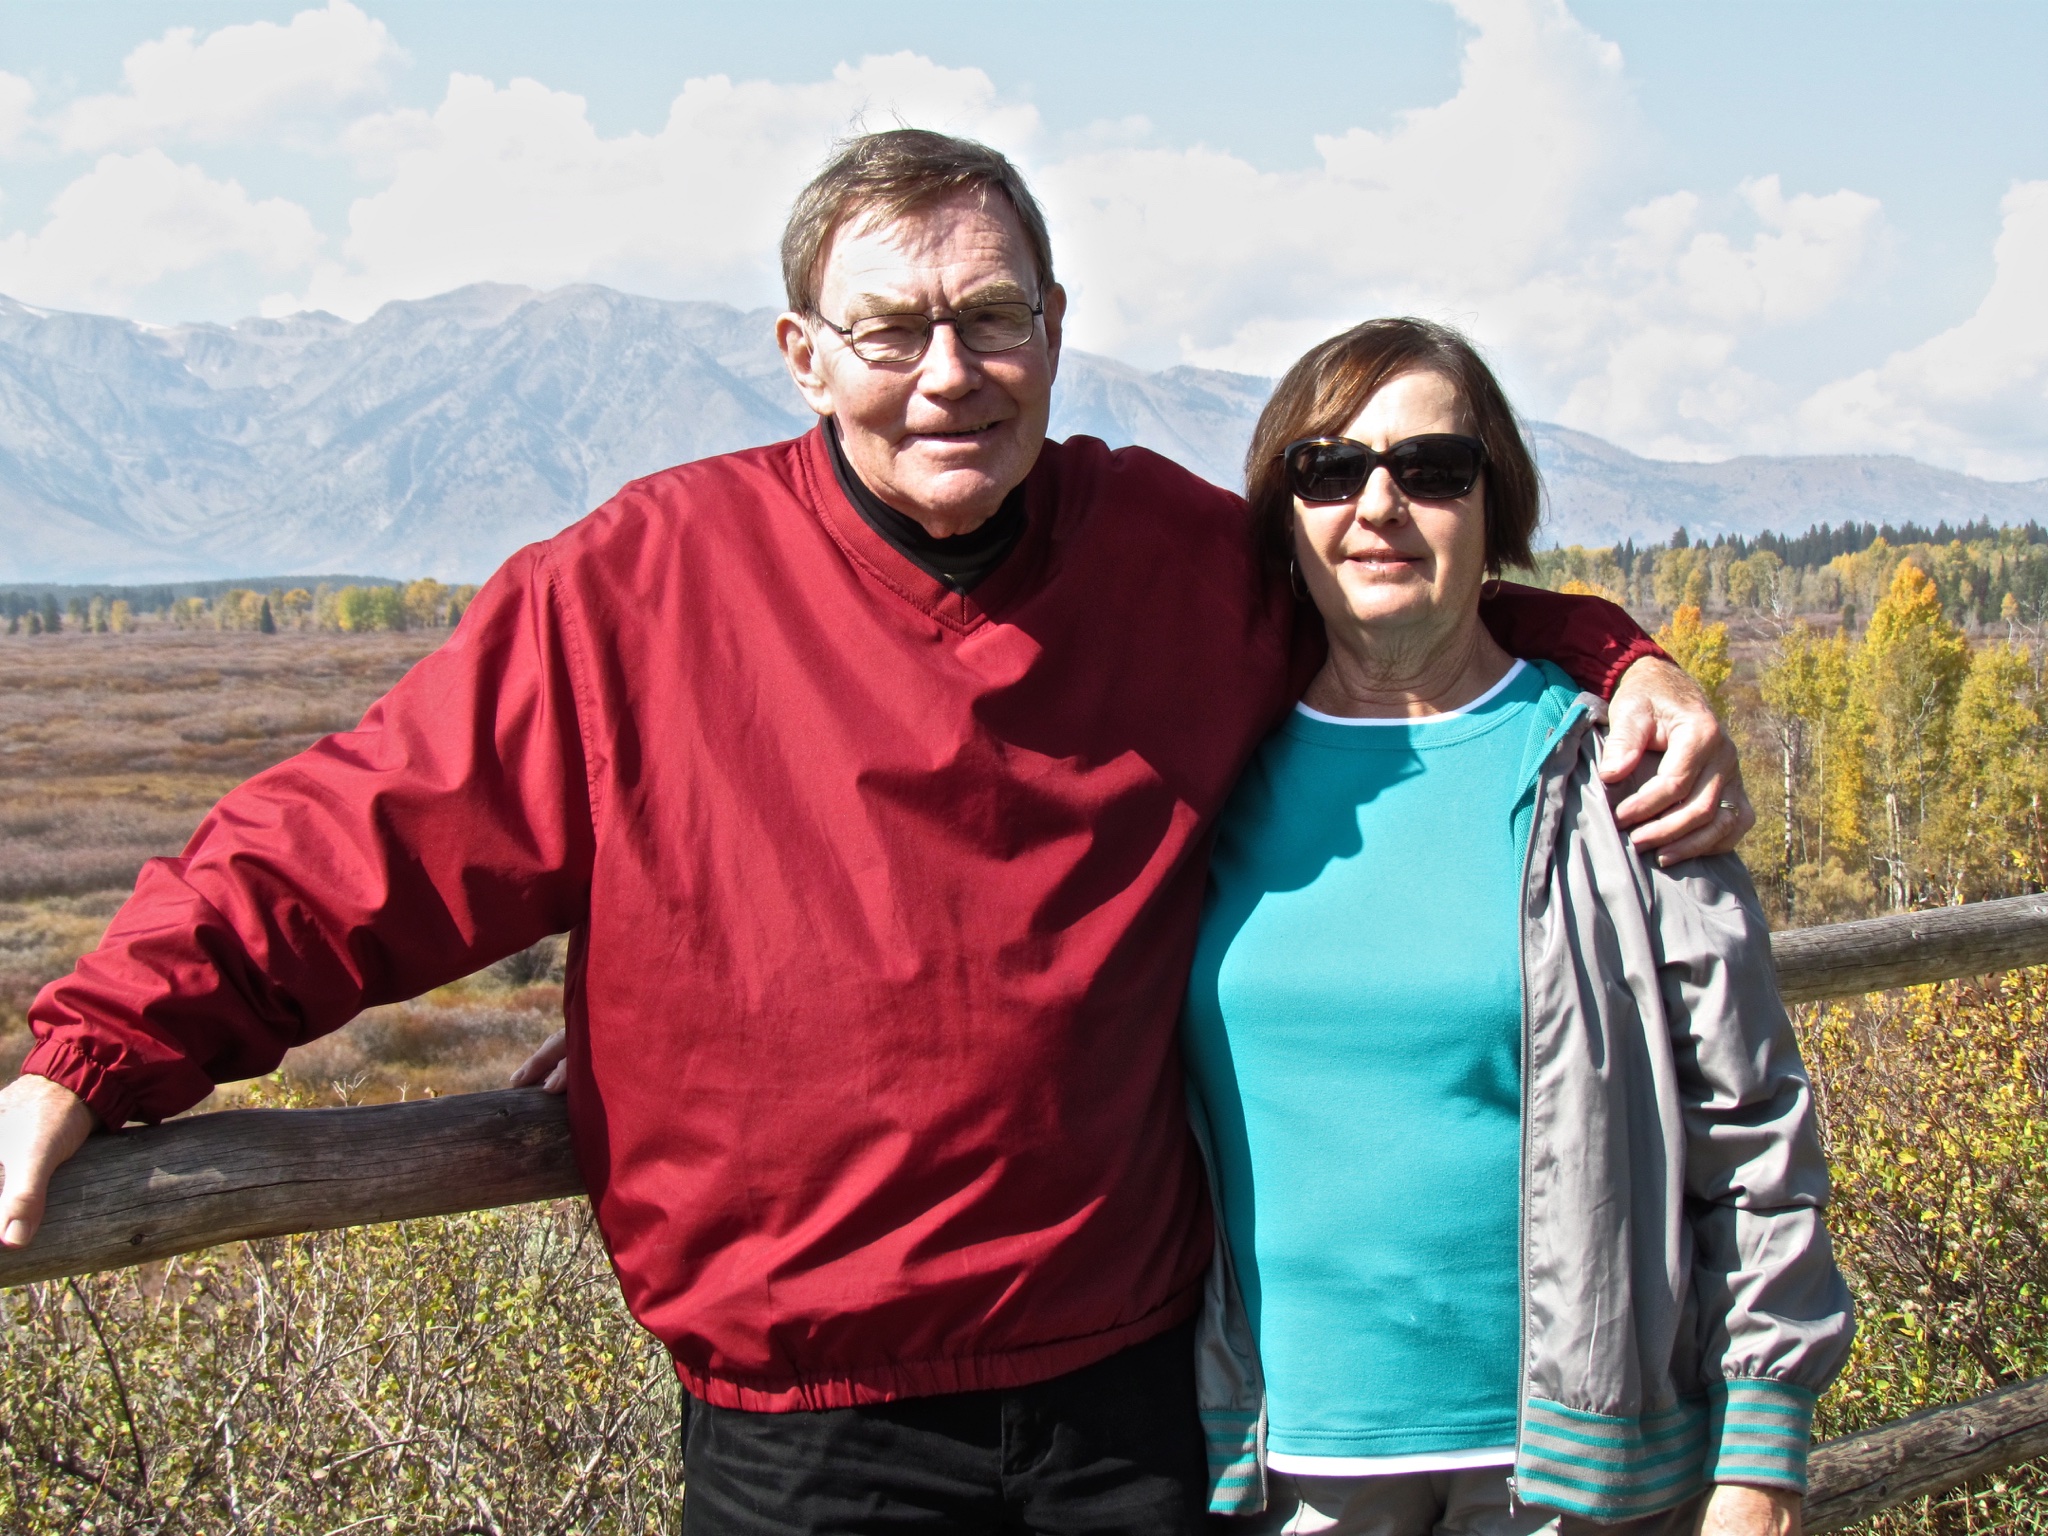 Yellowstone Trip - Just one of the wonderful times we have spent together filled with adventure and so much laughter! More a brother than a brother- in law! Sadly missed, but much loved!